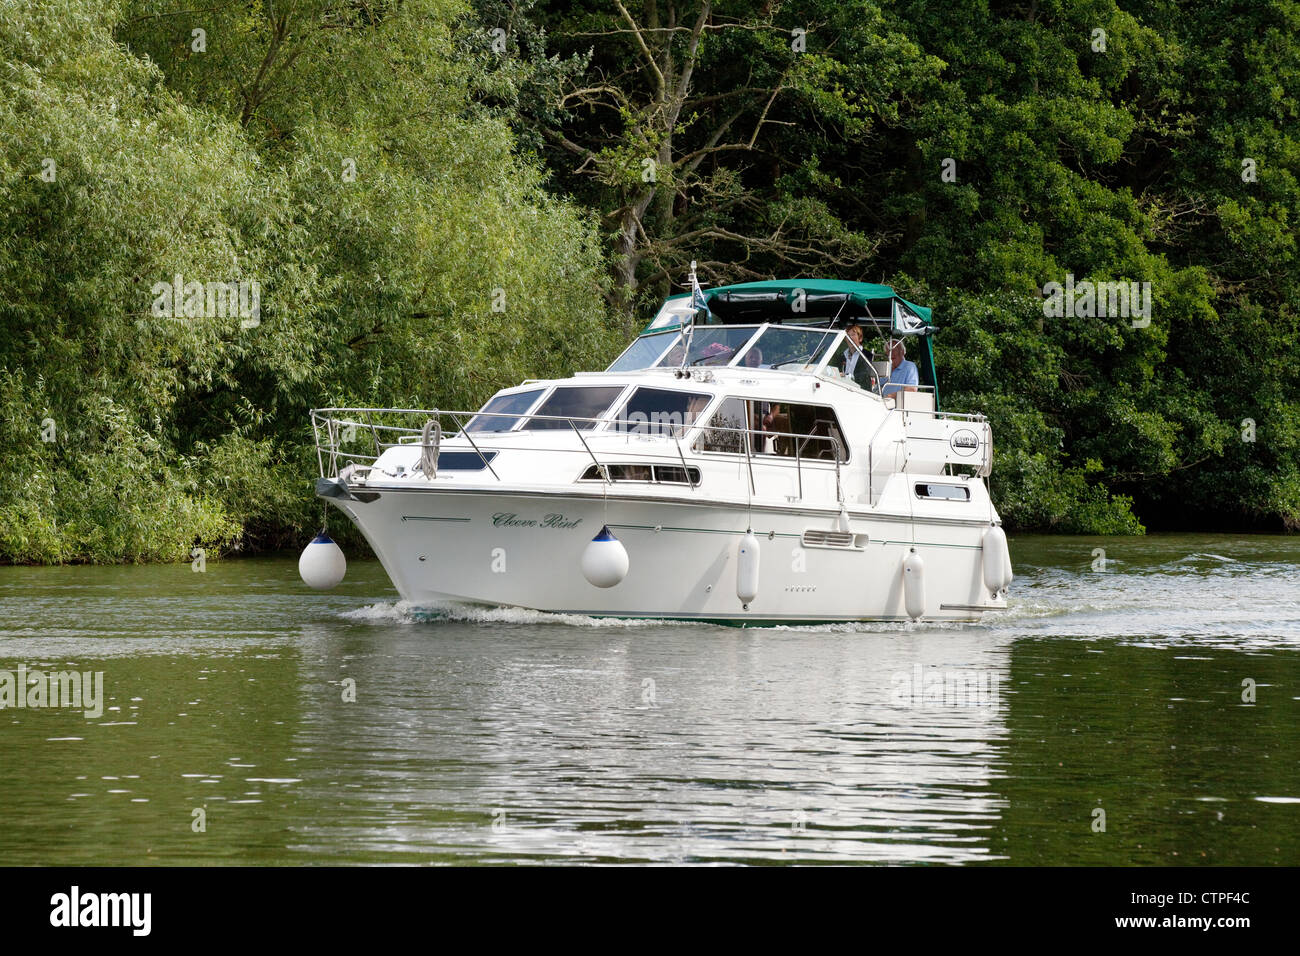 Motor boat on the River Thames at Wallingford Oxfordshire UK Stock Photo